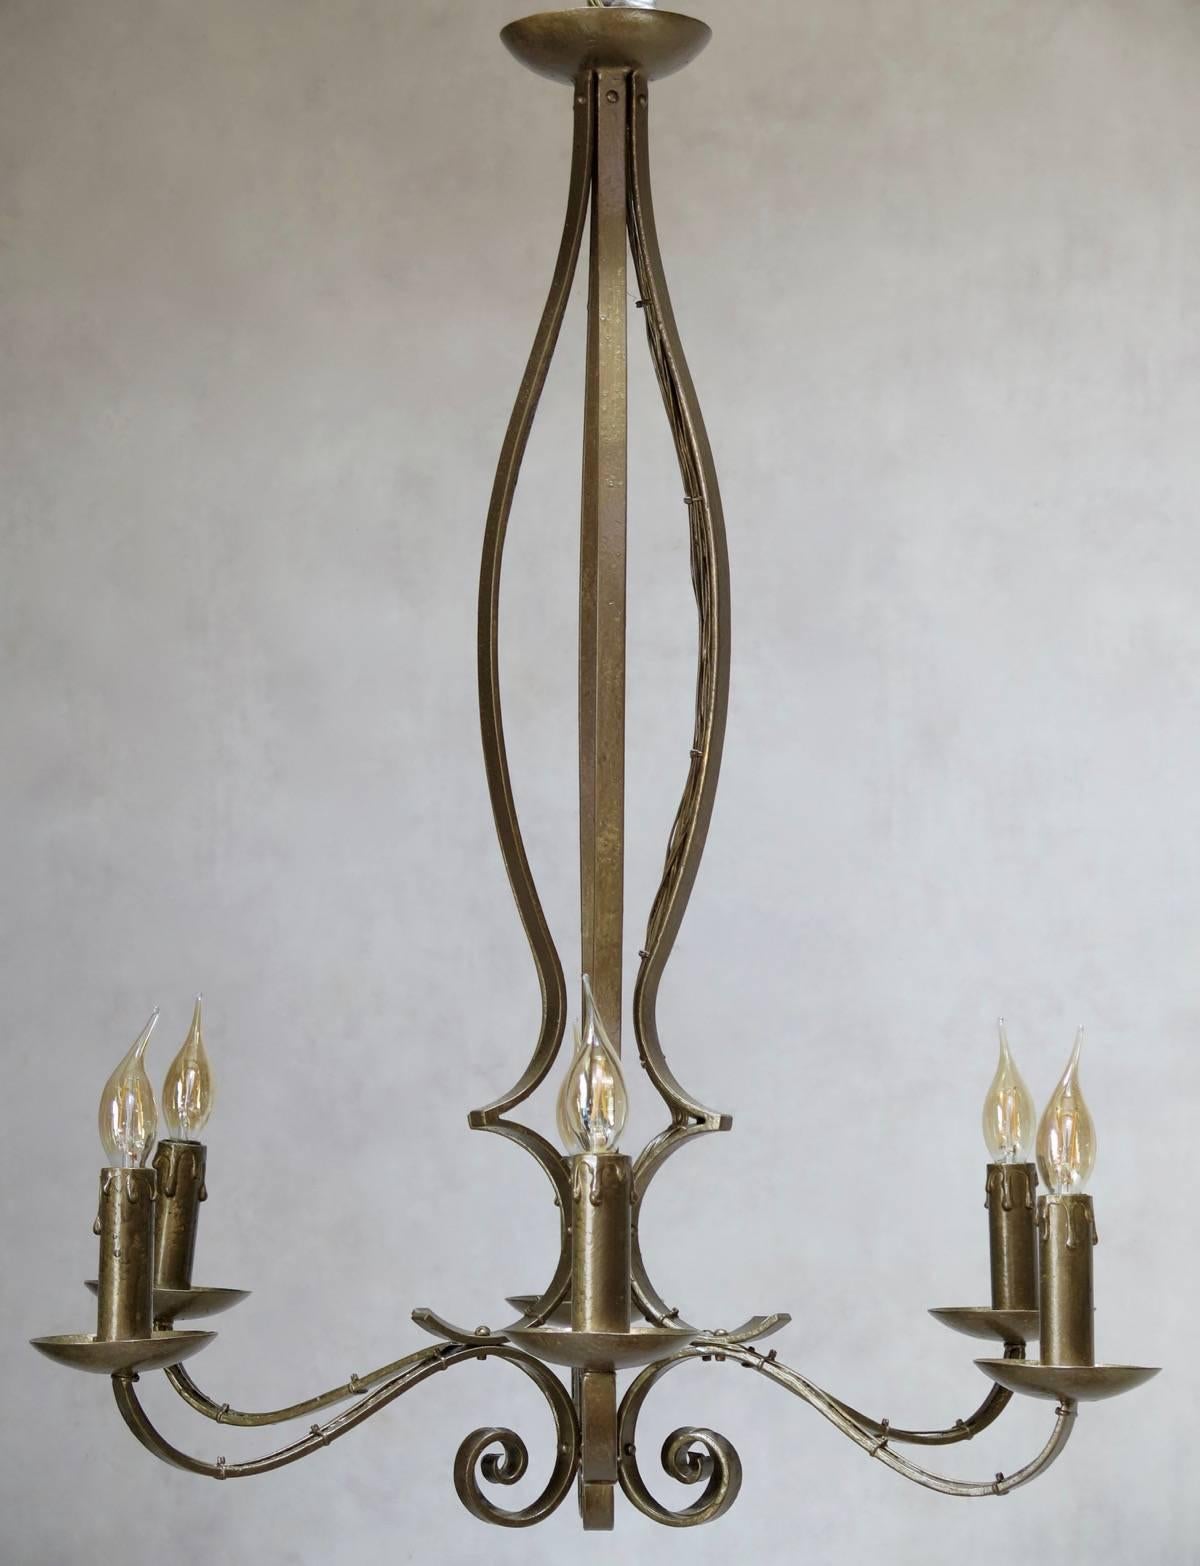 A 1940s Art Deco gold-painted iron chandelier with six lights.